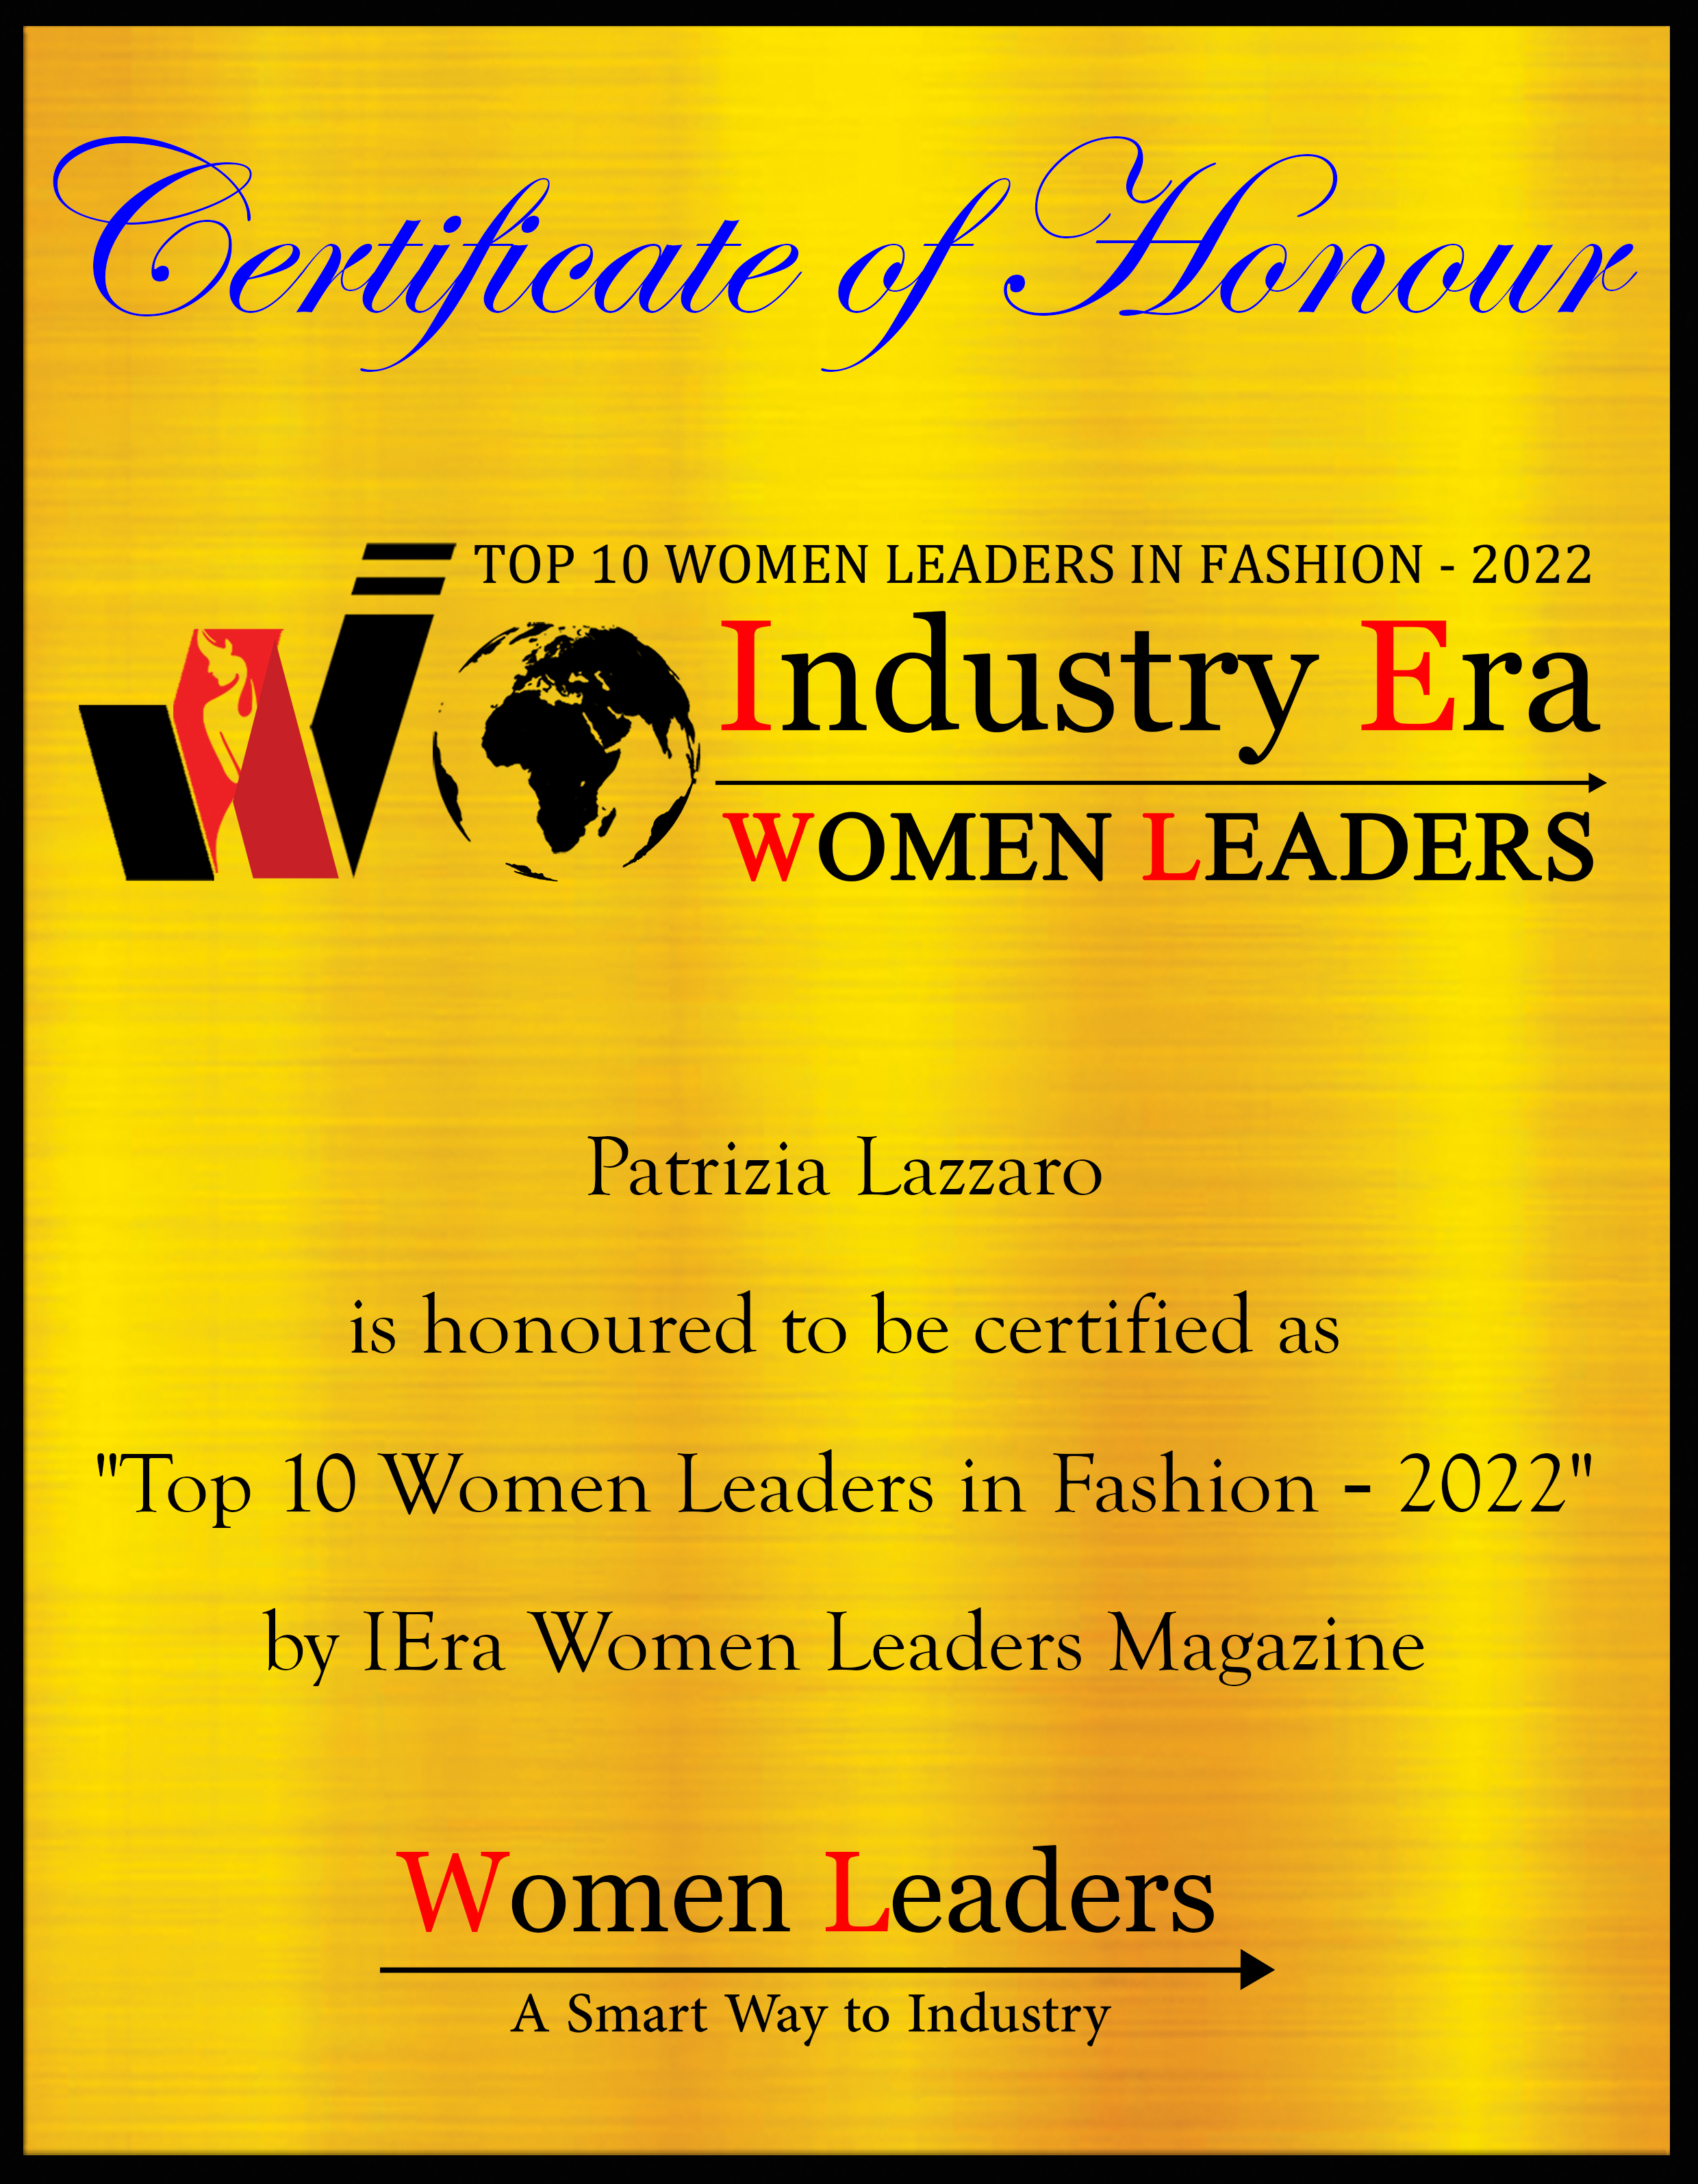 Patrizia Lazzaro, Vice President Global E-commerce at Guess Europe Sagl, Top 10 Women Leaders in Fashion of 2022